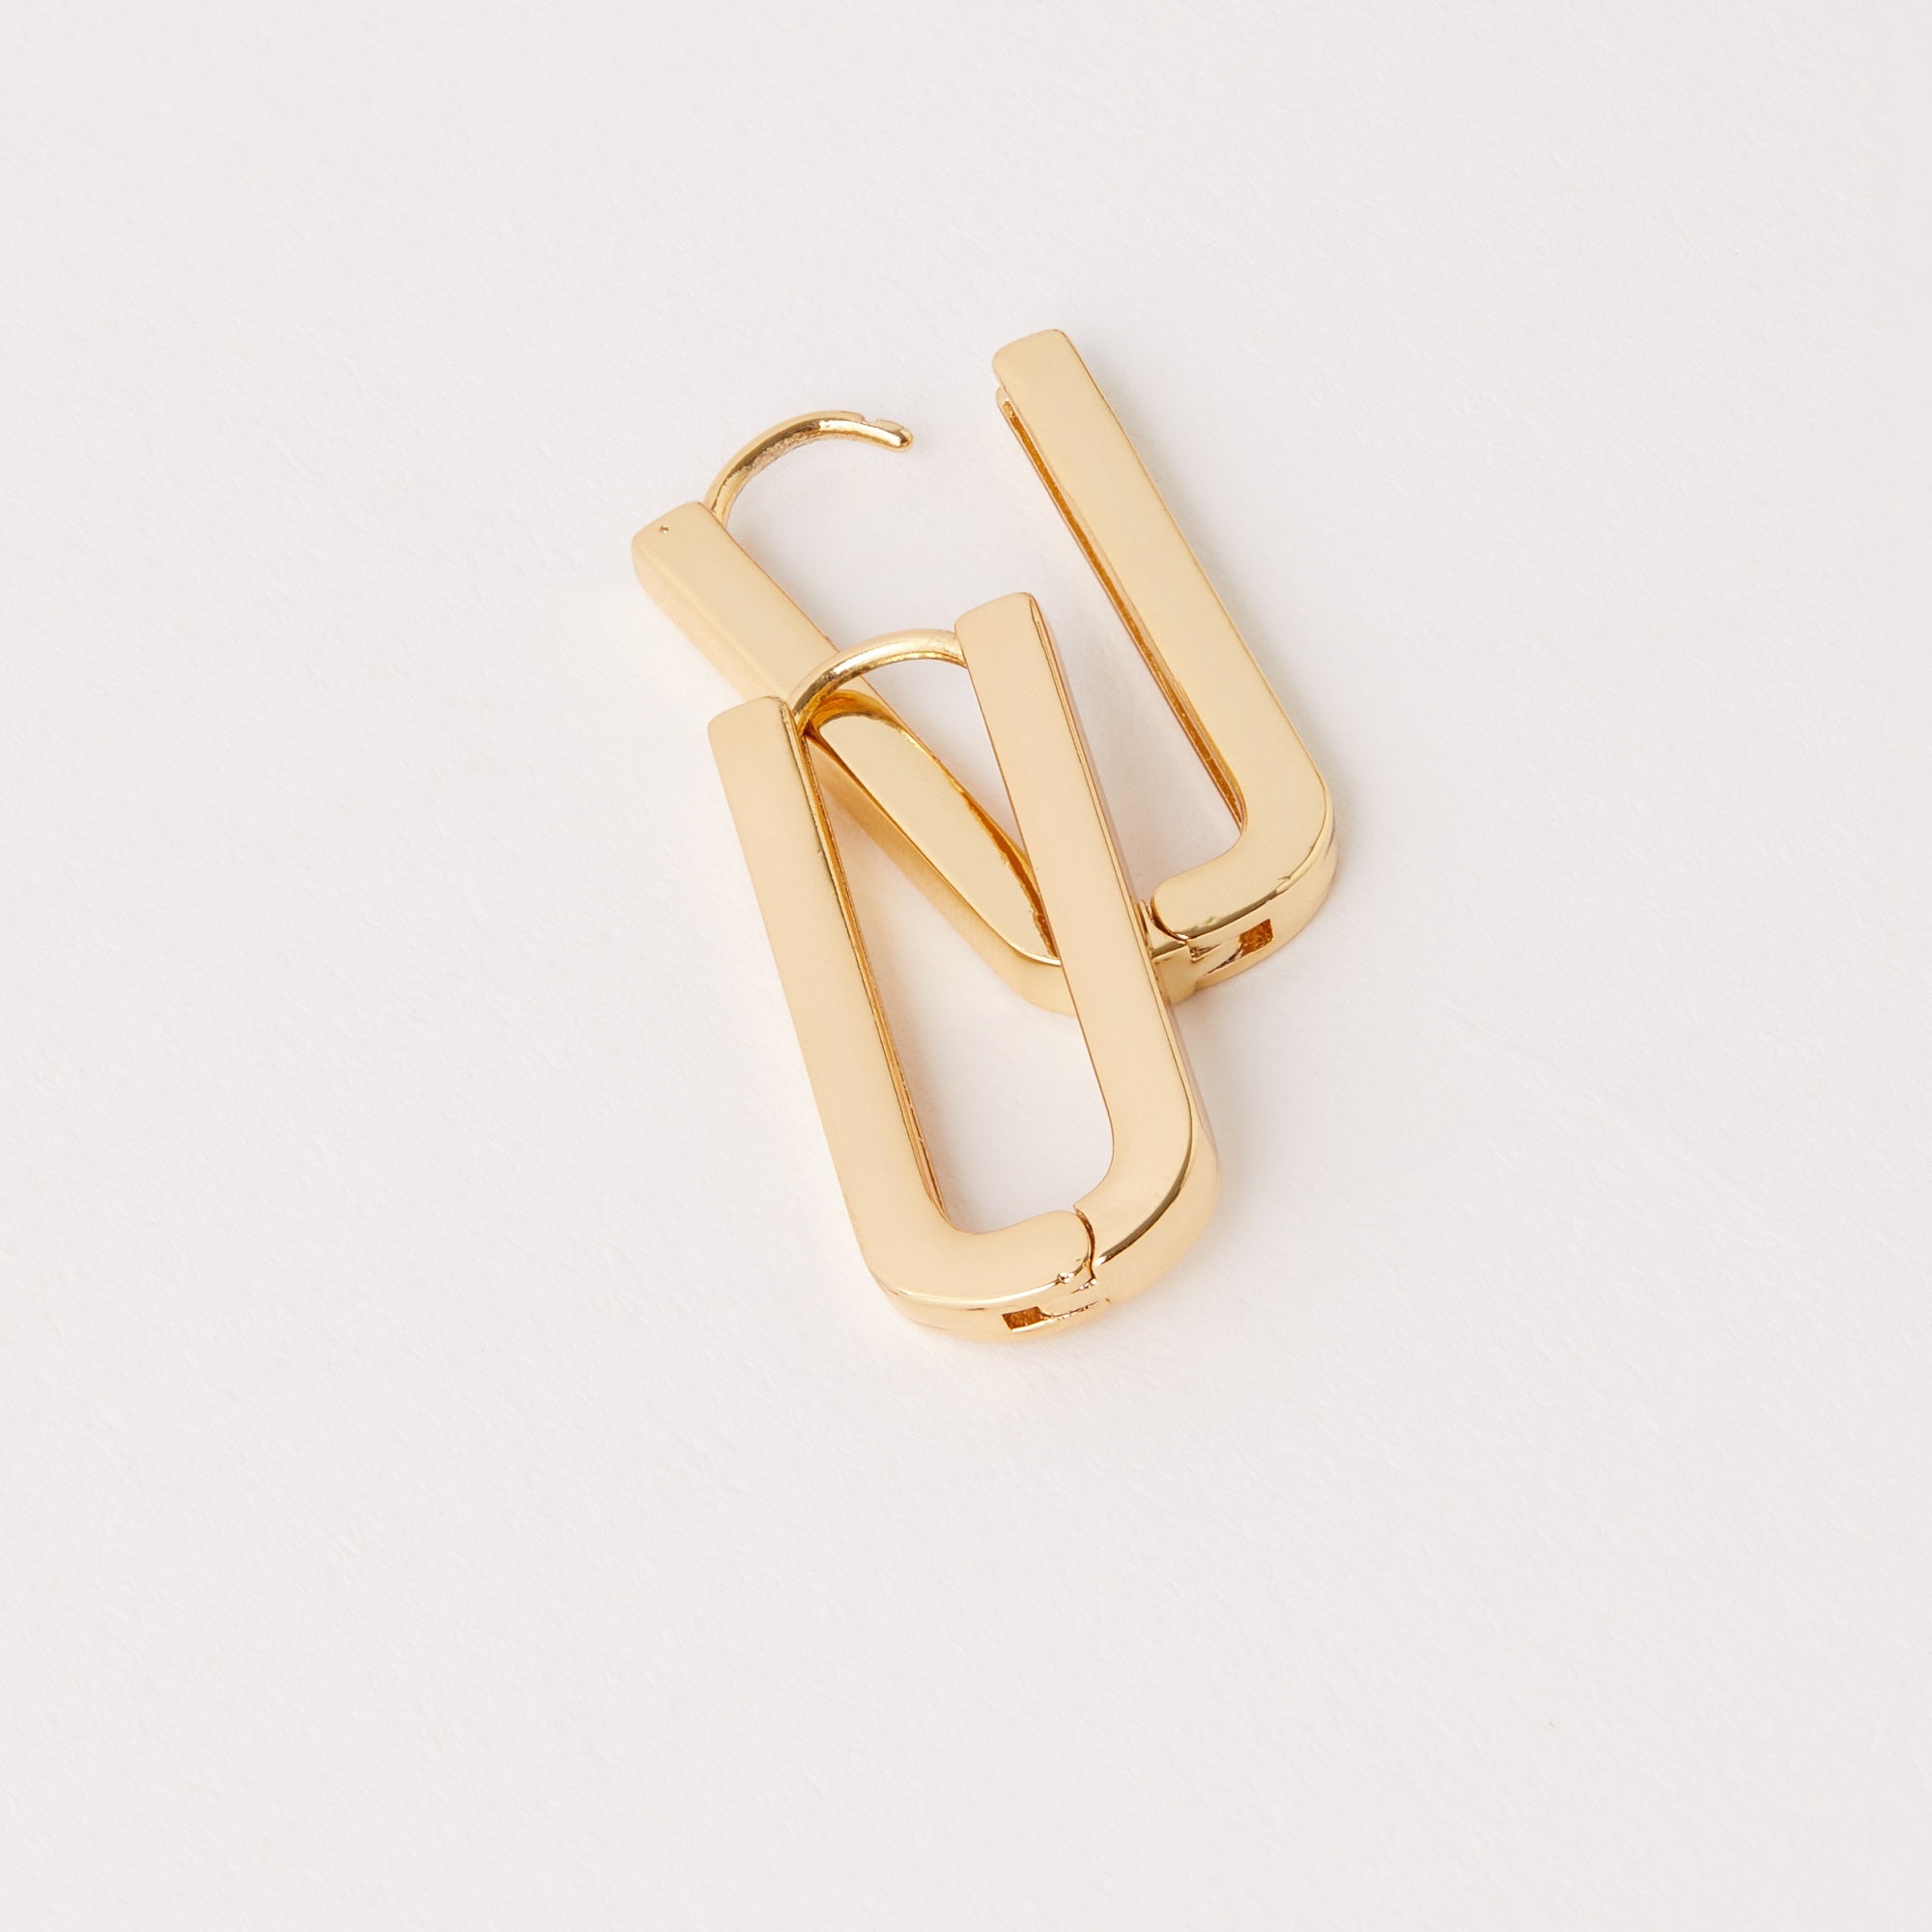 Real Gold Plated Basic Chunky Rectangular Link Hoop Earrings For Women By Accessorize London